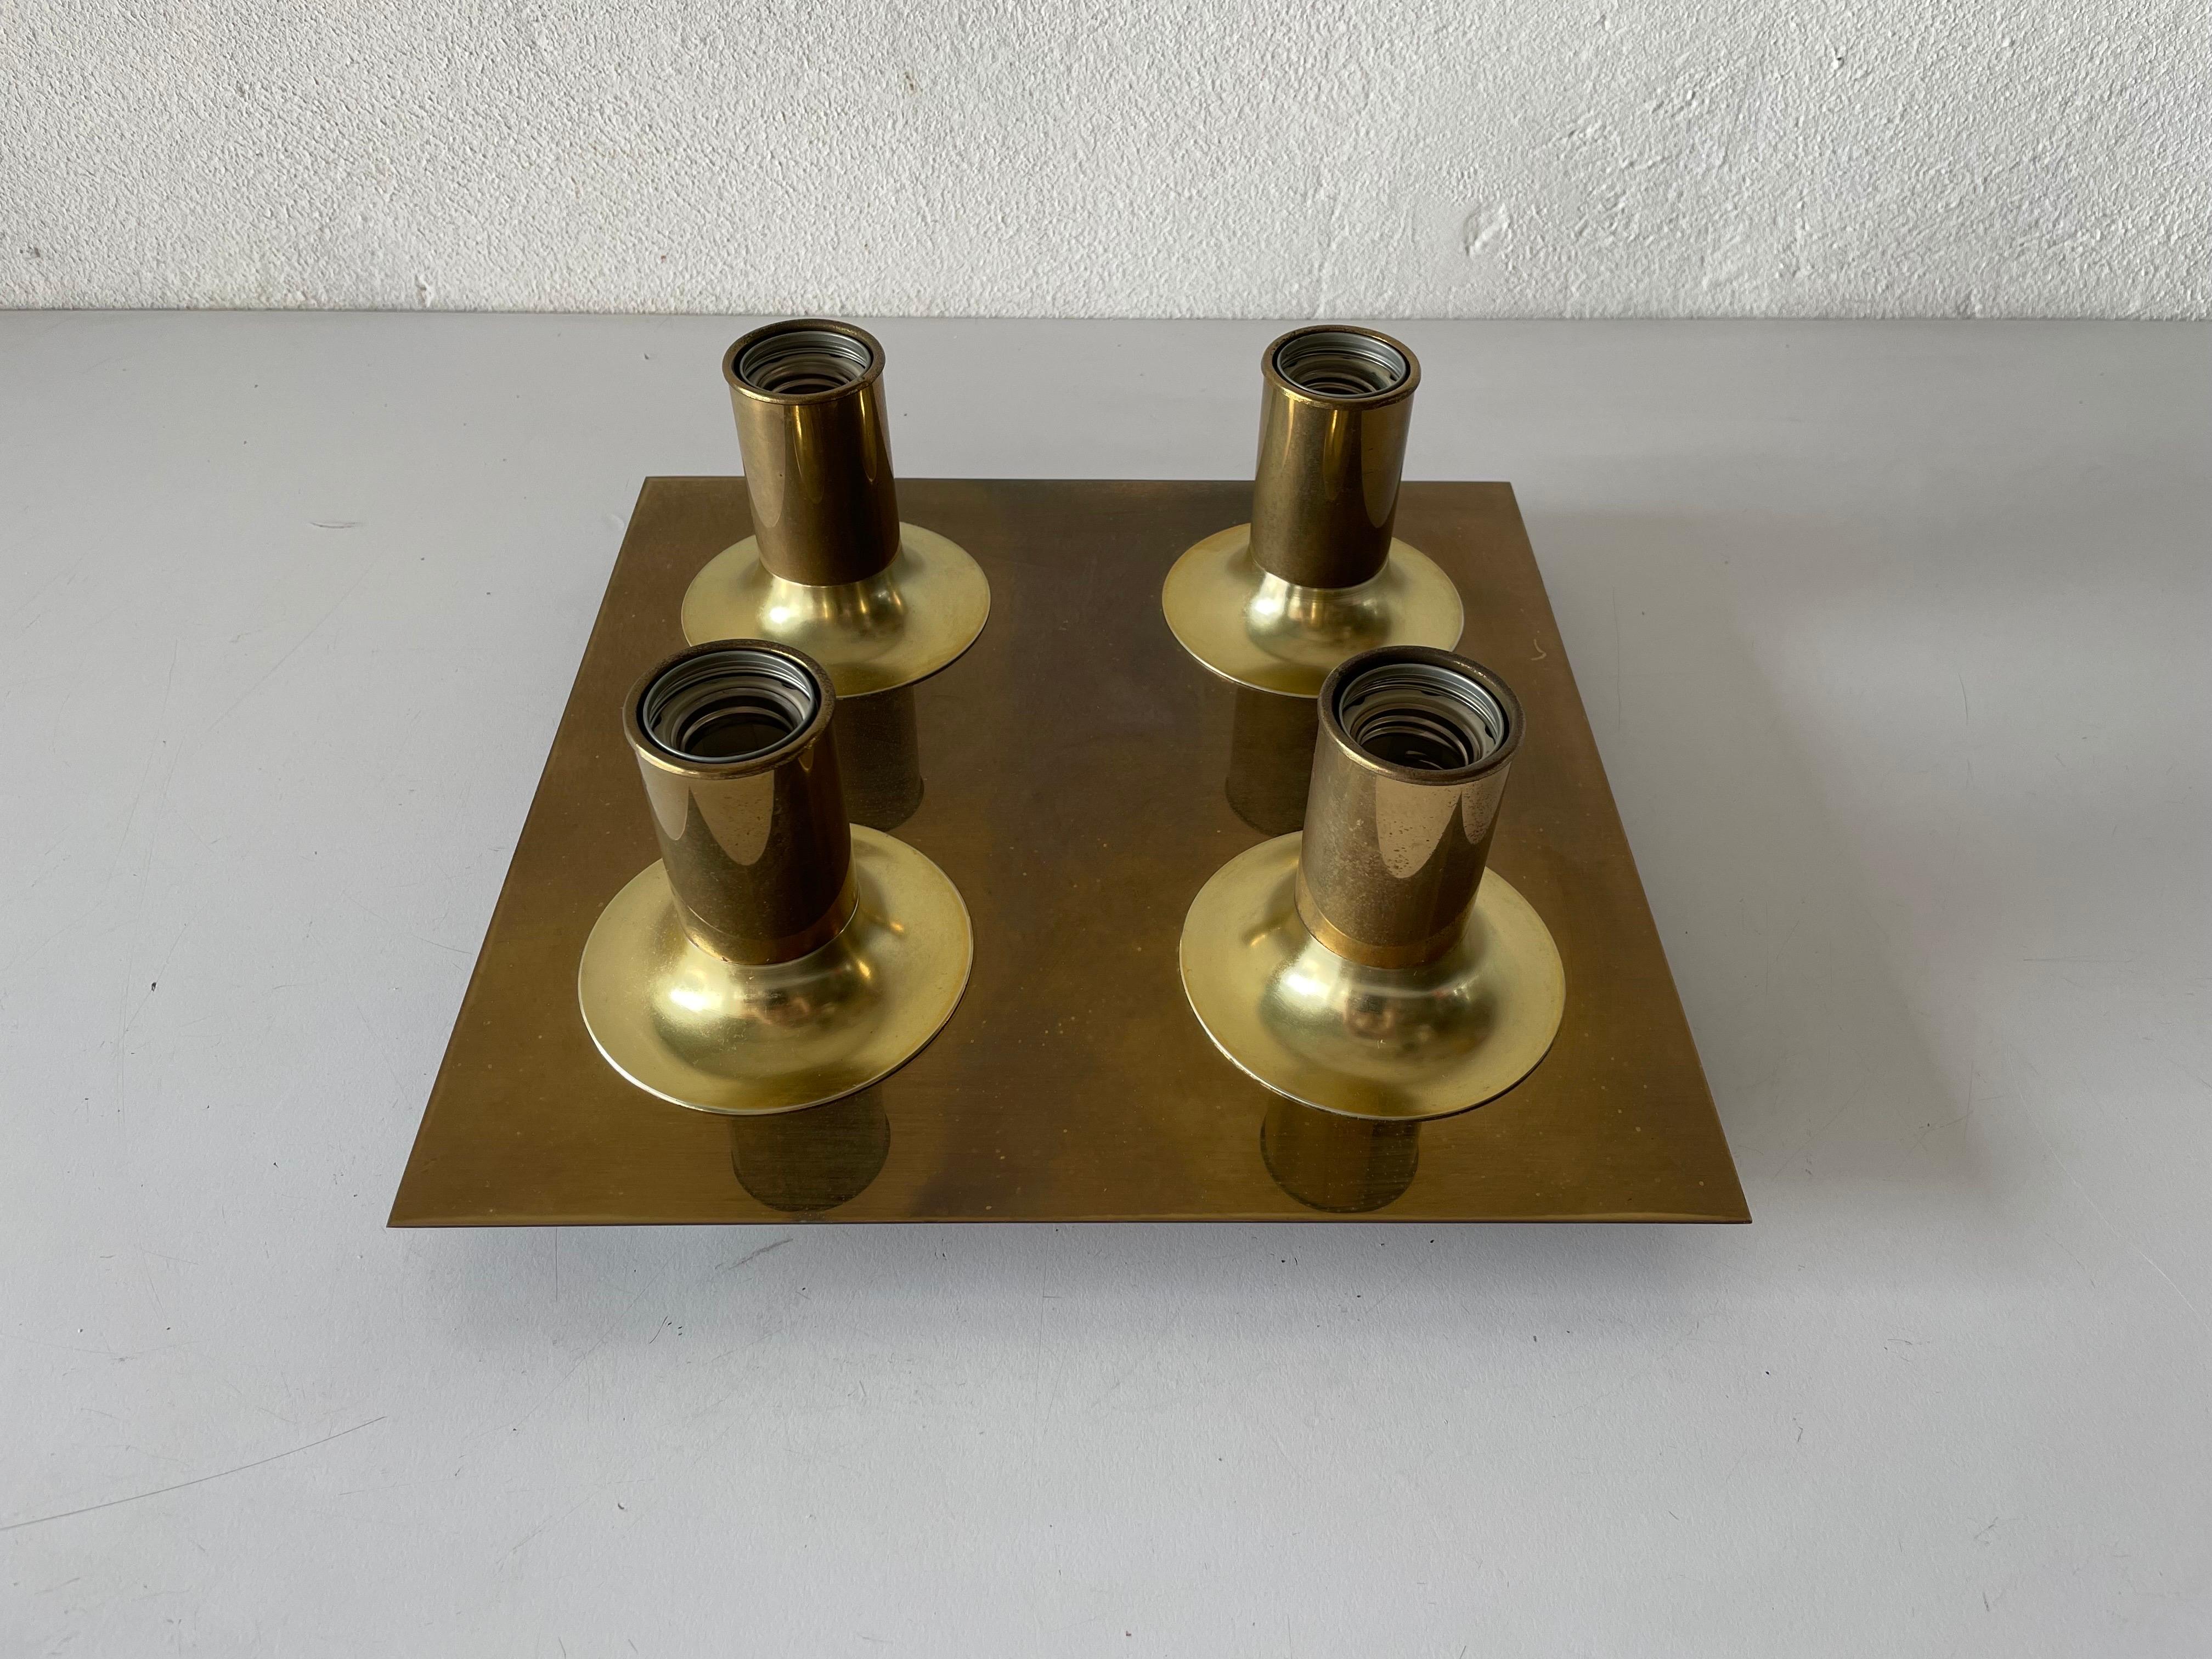 Brass square design 4 head ceiling lamp by Cosack, 1970s, Germany.

Designed and manufactured for Gebrüder Cosack.

Rare Minimalist design flushmount or wall lamp
Original label on the backside of the lamp.


Lamp is in very good condition.